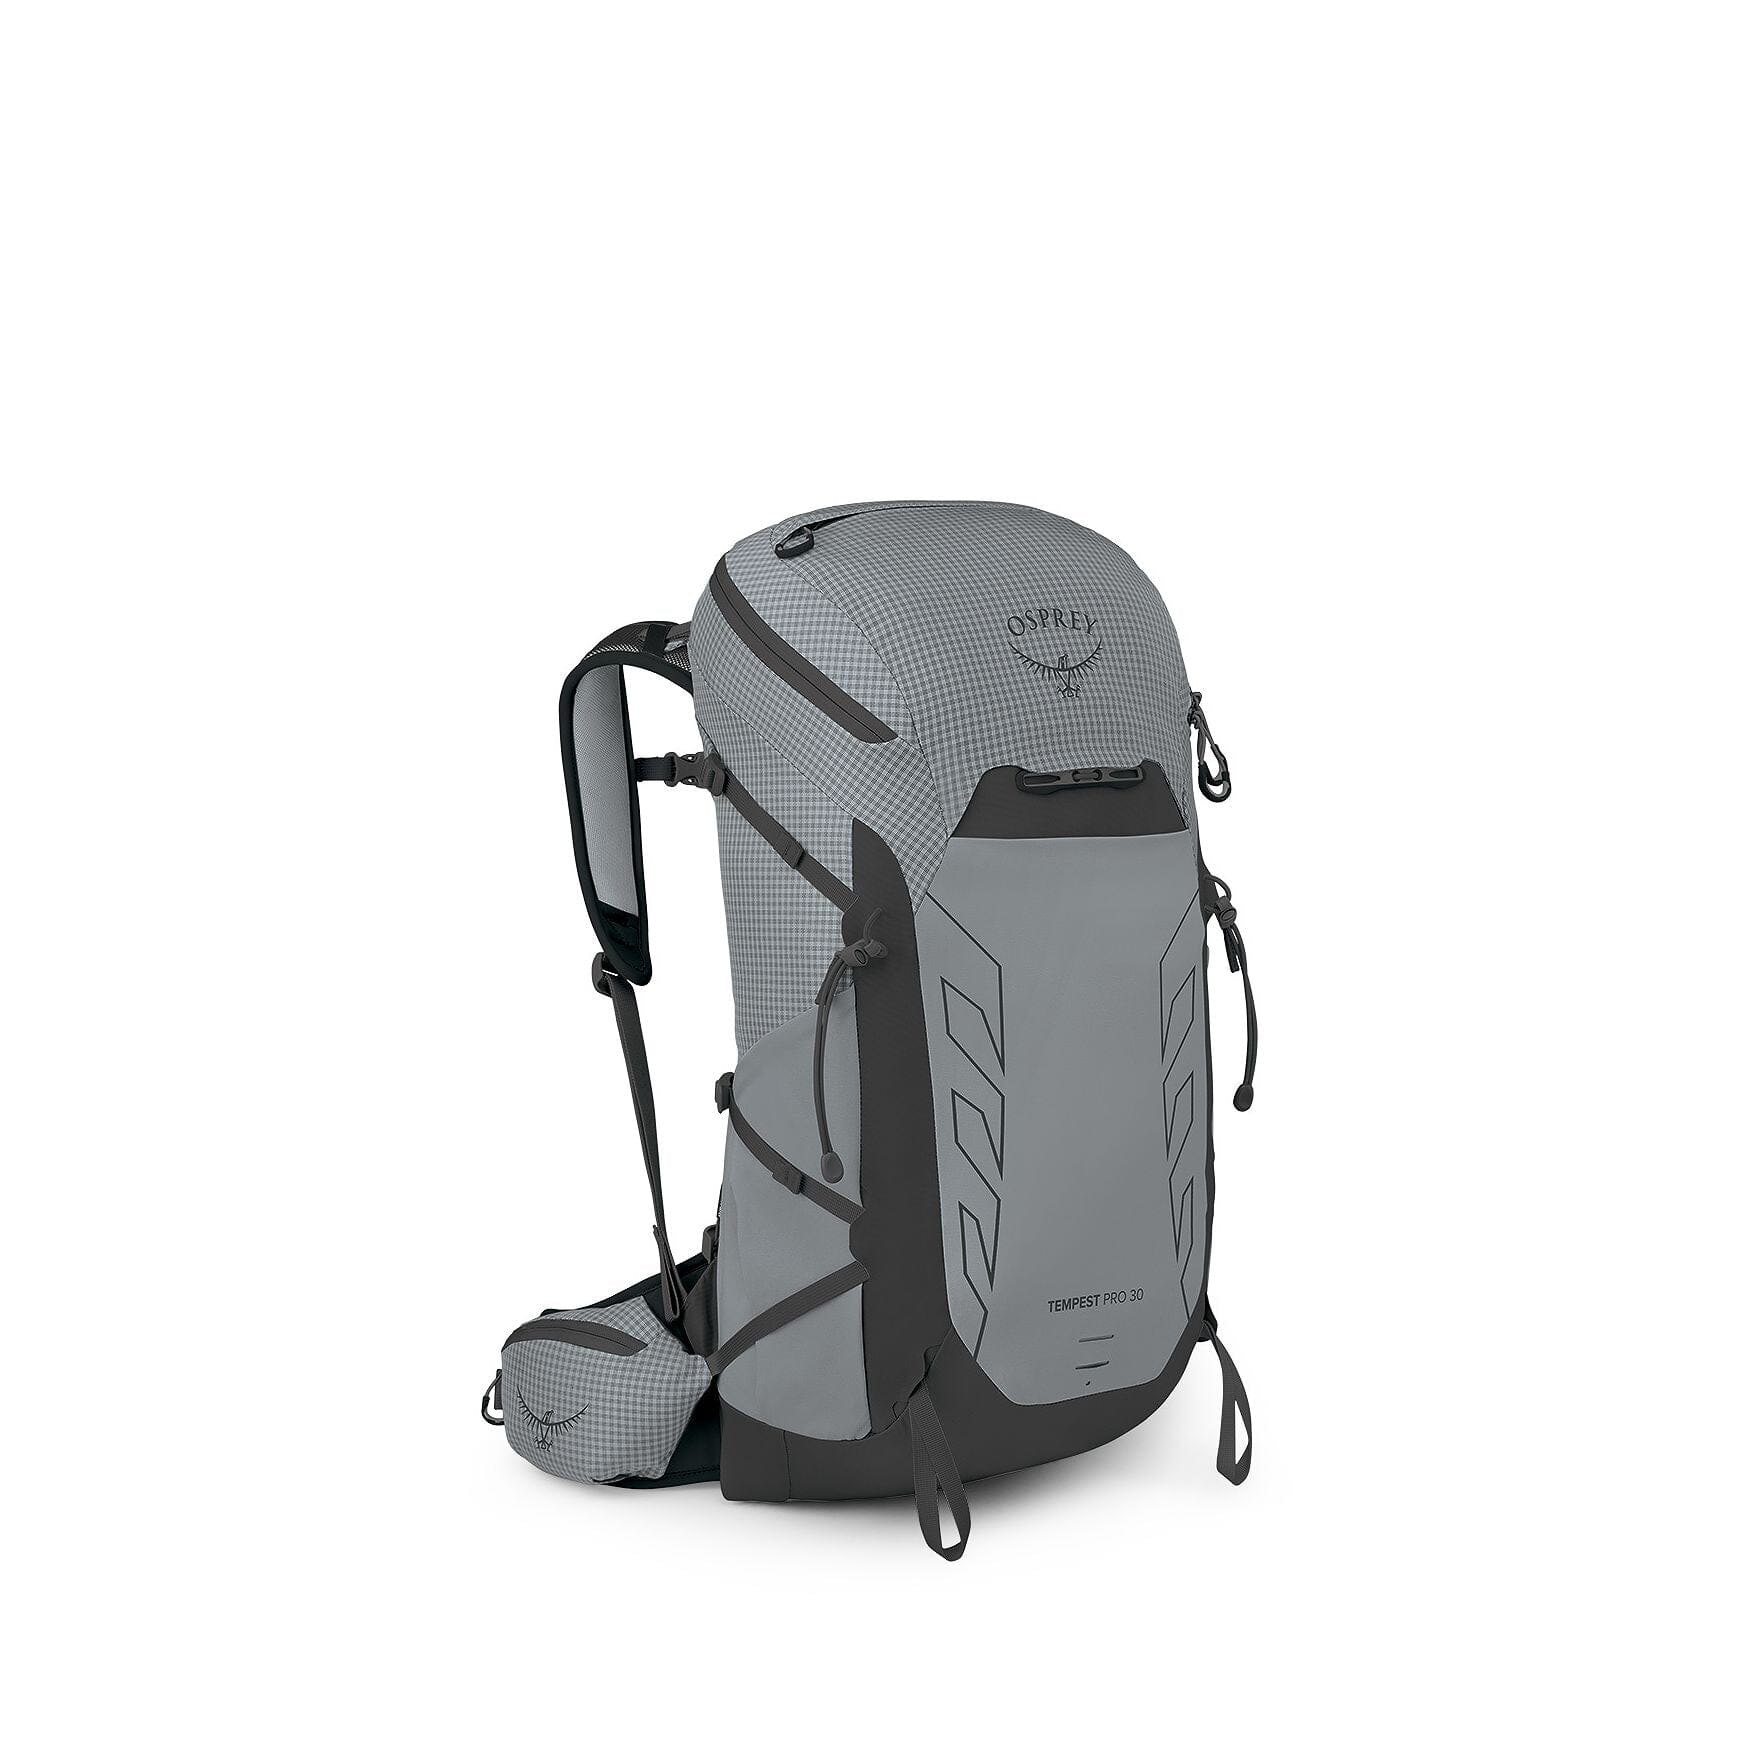 Osprey Tempest Pro 30 Women's Day Hiking Backpack Silver Lining 